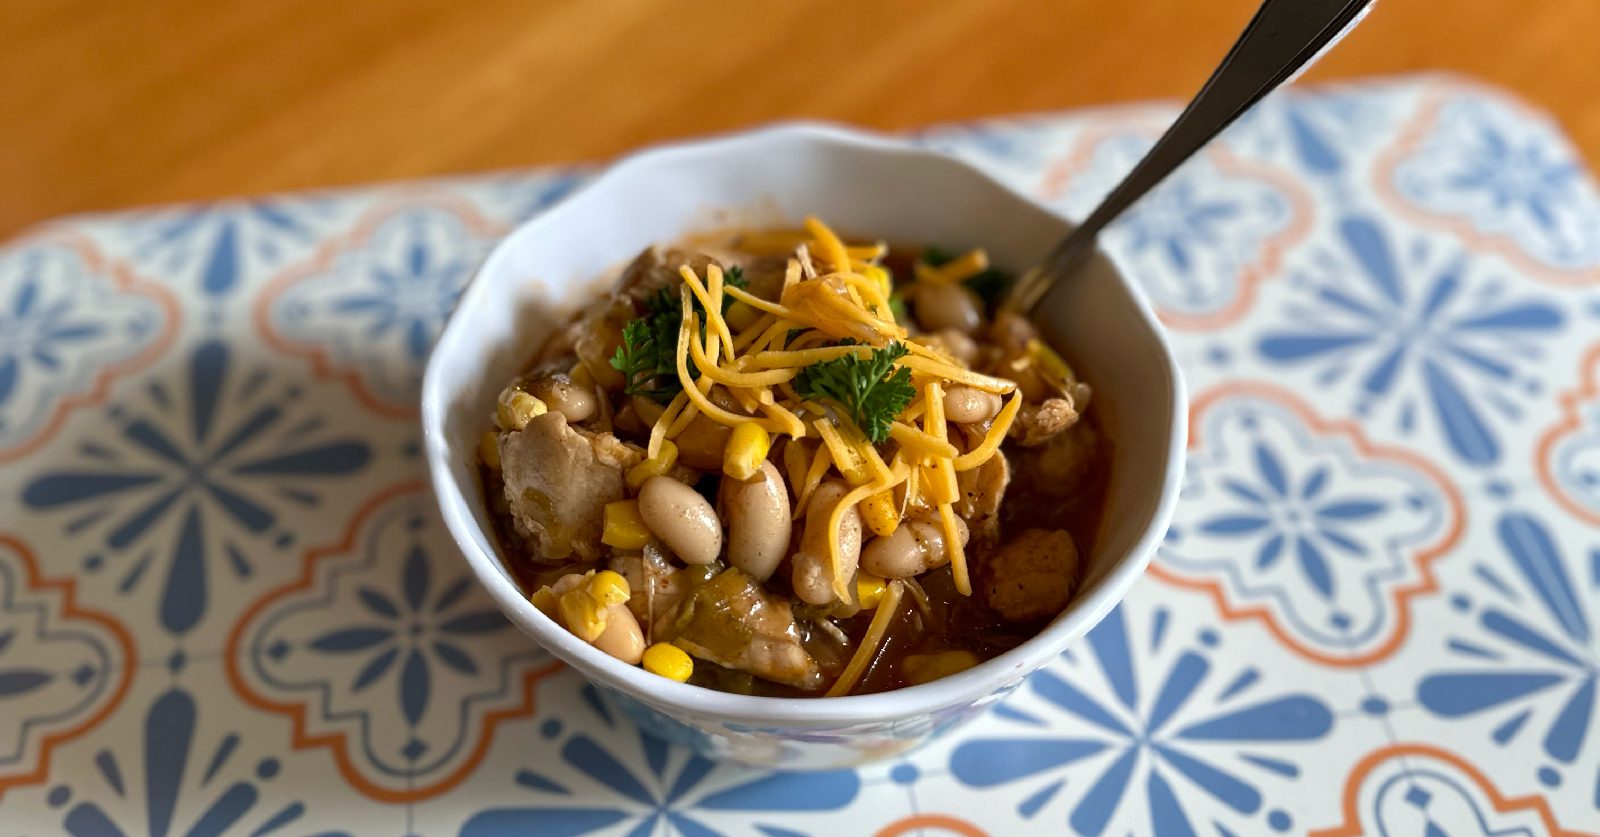 Slow cooked Chicken Chili